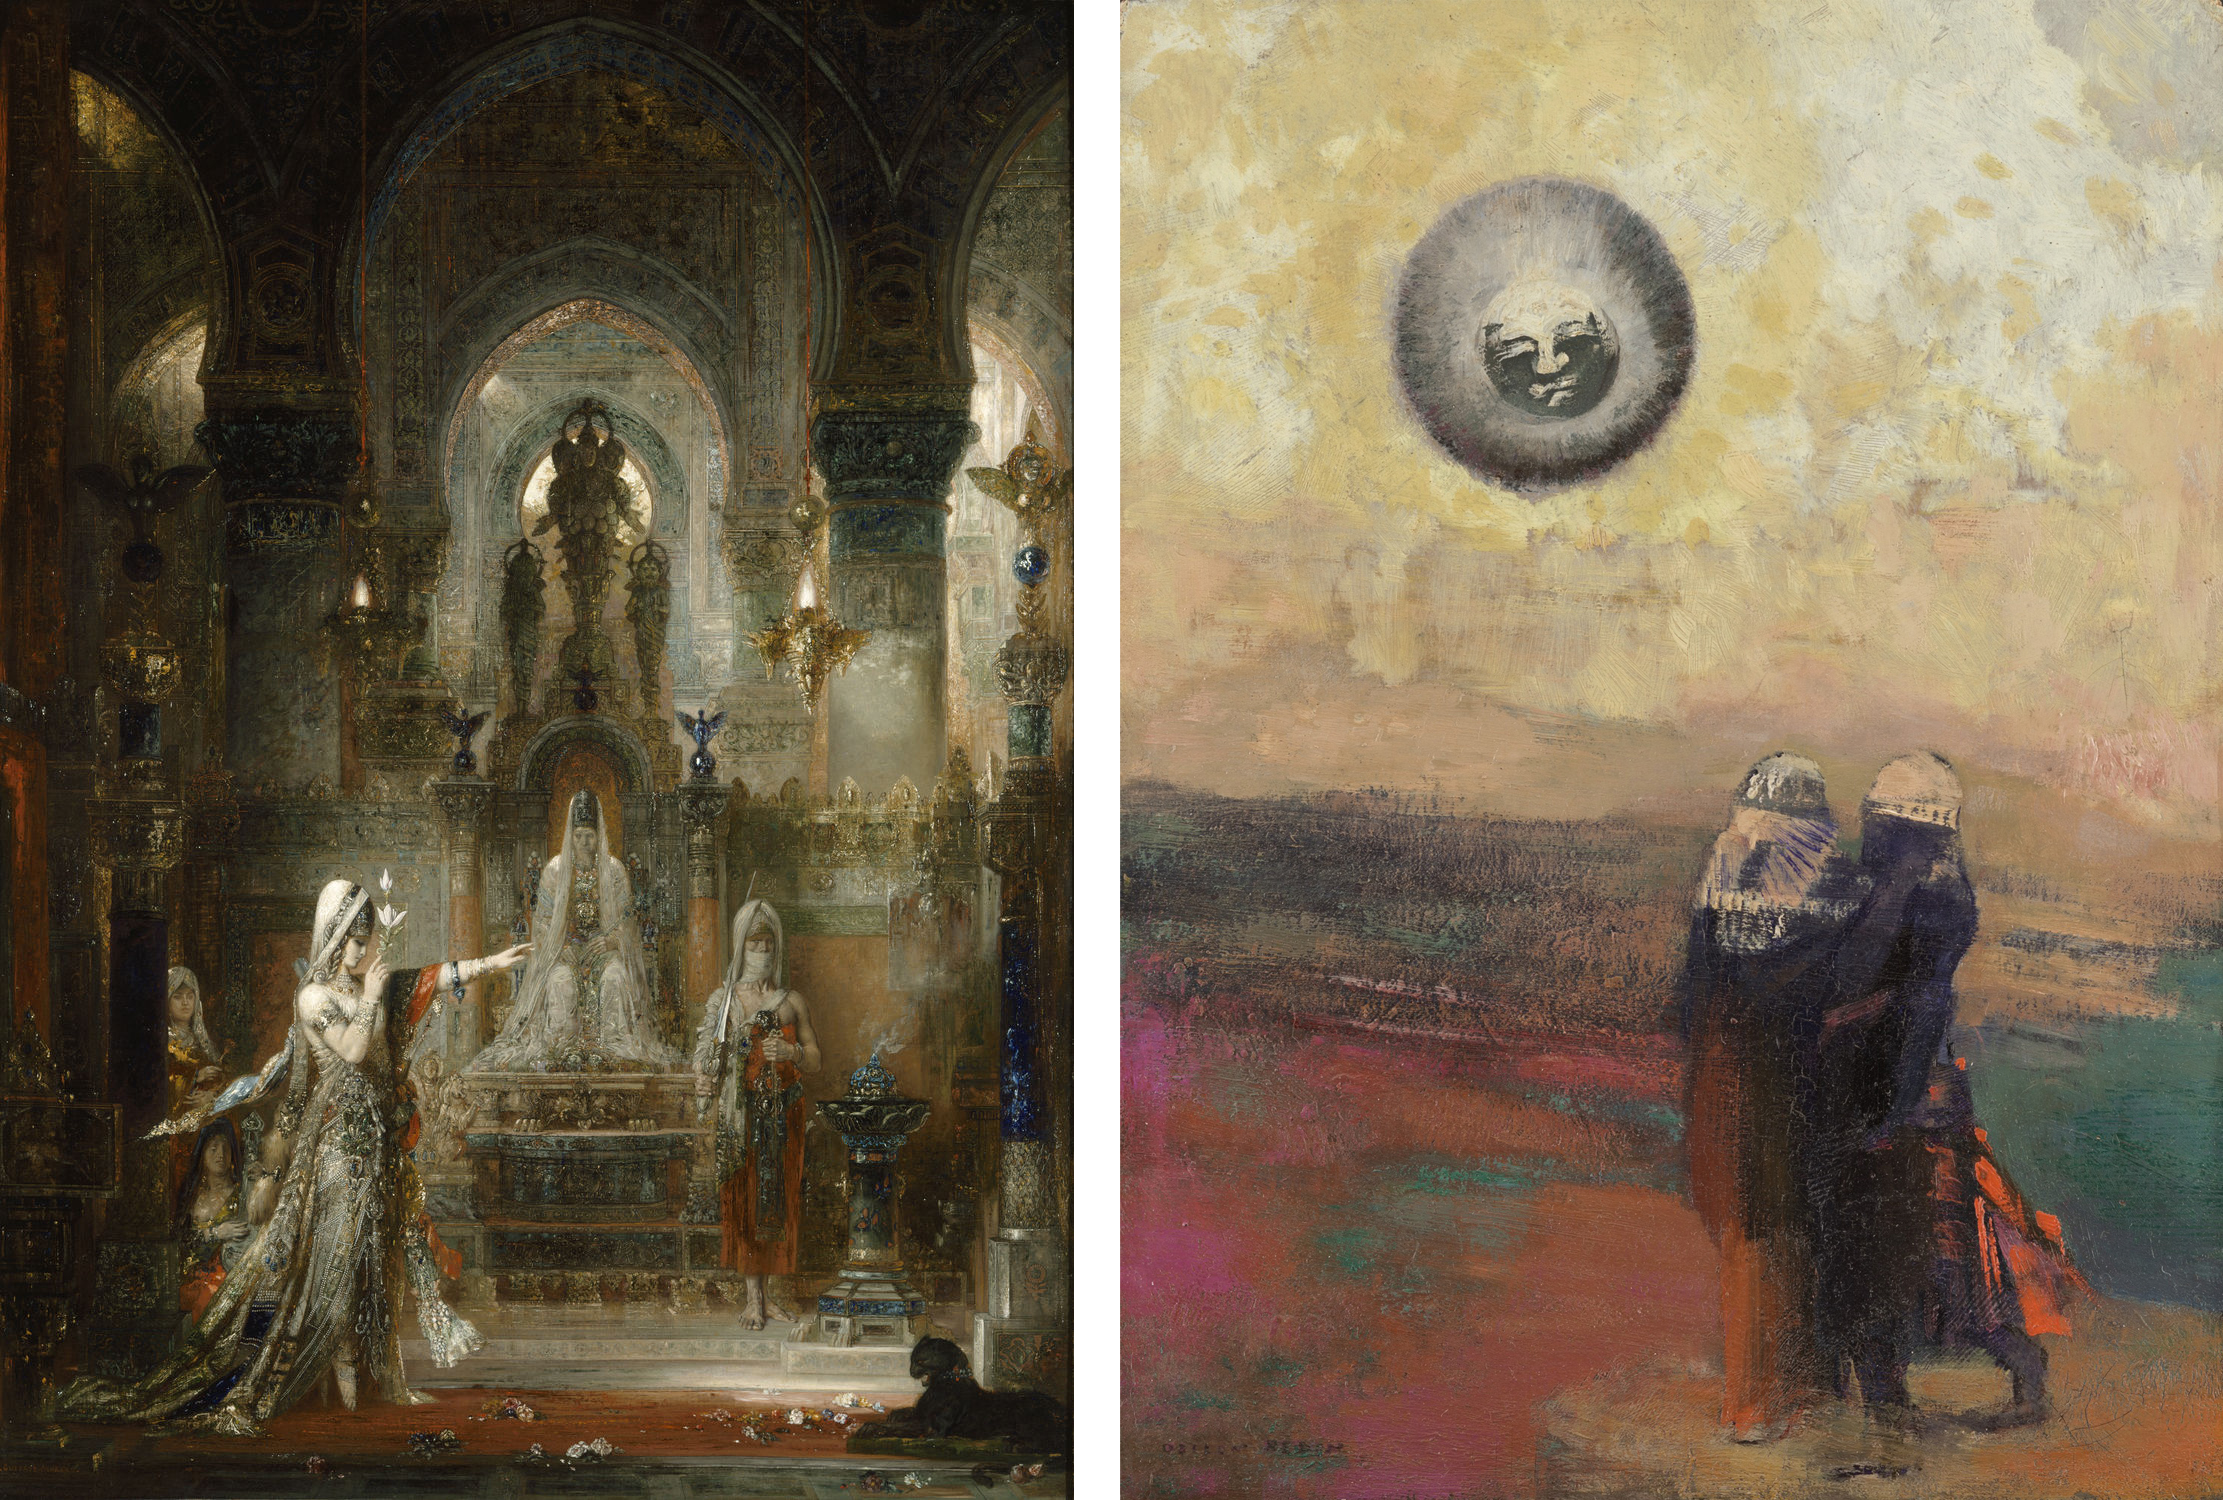 Left: Gustave Moreau, Salome Dancing before Herod, 1876, oil on canvas, 58.5 x 41.1” (Hammer Museum, Los Angeles); Right: Odilon Redon, The Black Sun, c. 1900 oil on board, 12 3/4 x 9 3/8” (MoMA)